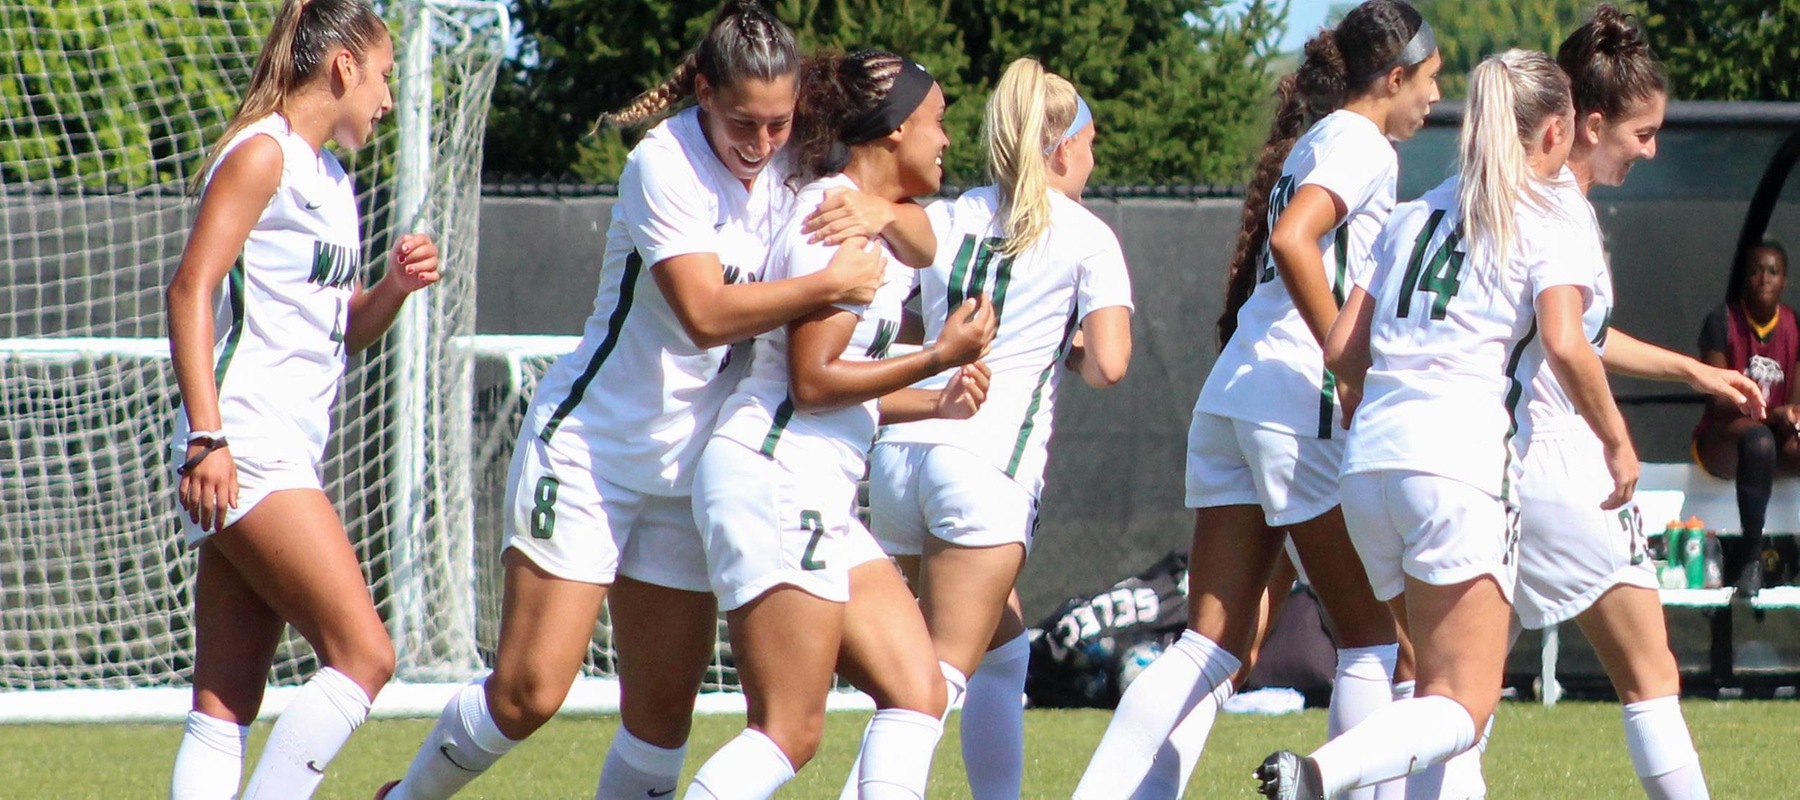 Wilmington University player Emily Navarrete (8) celebrating after scoring against  Bloomfield during their NCAA Women?s soccer match at the Wilmington University sports facility in Newark, Delaware September 25, 2021
April Doyle Photo